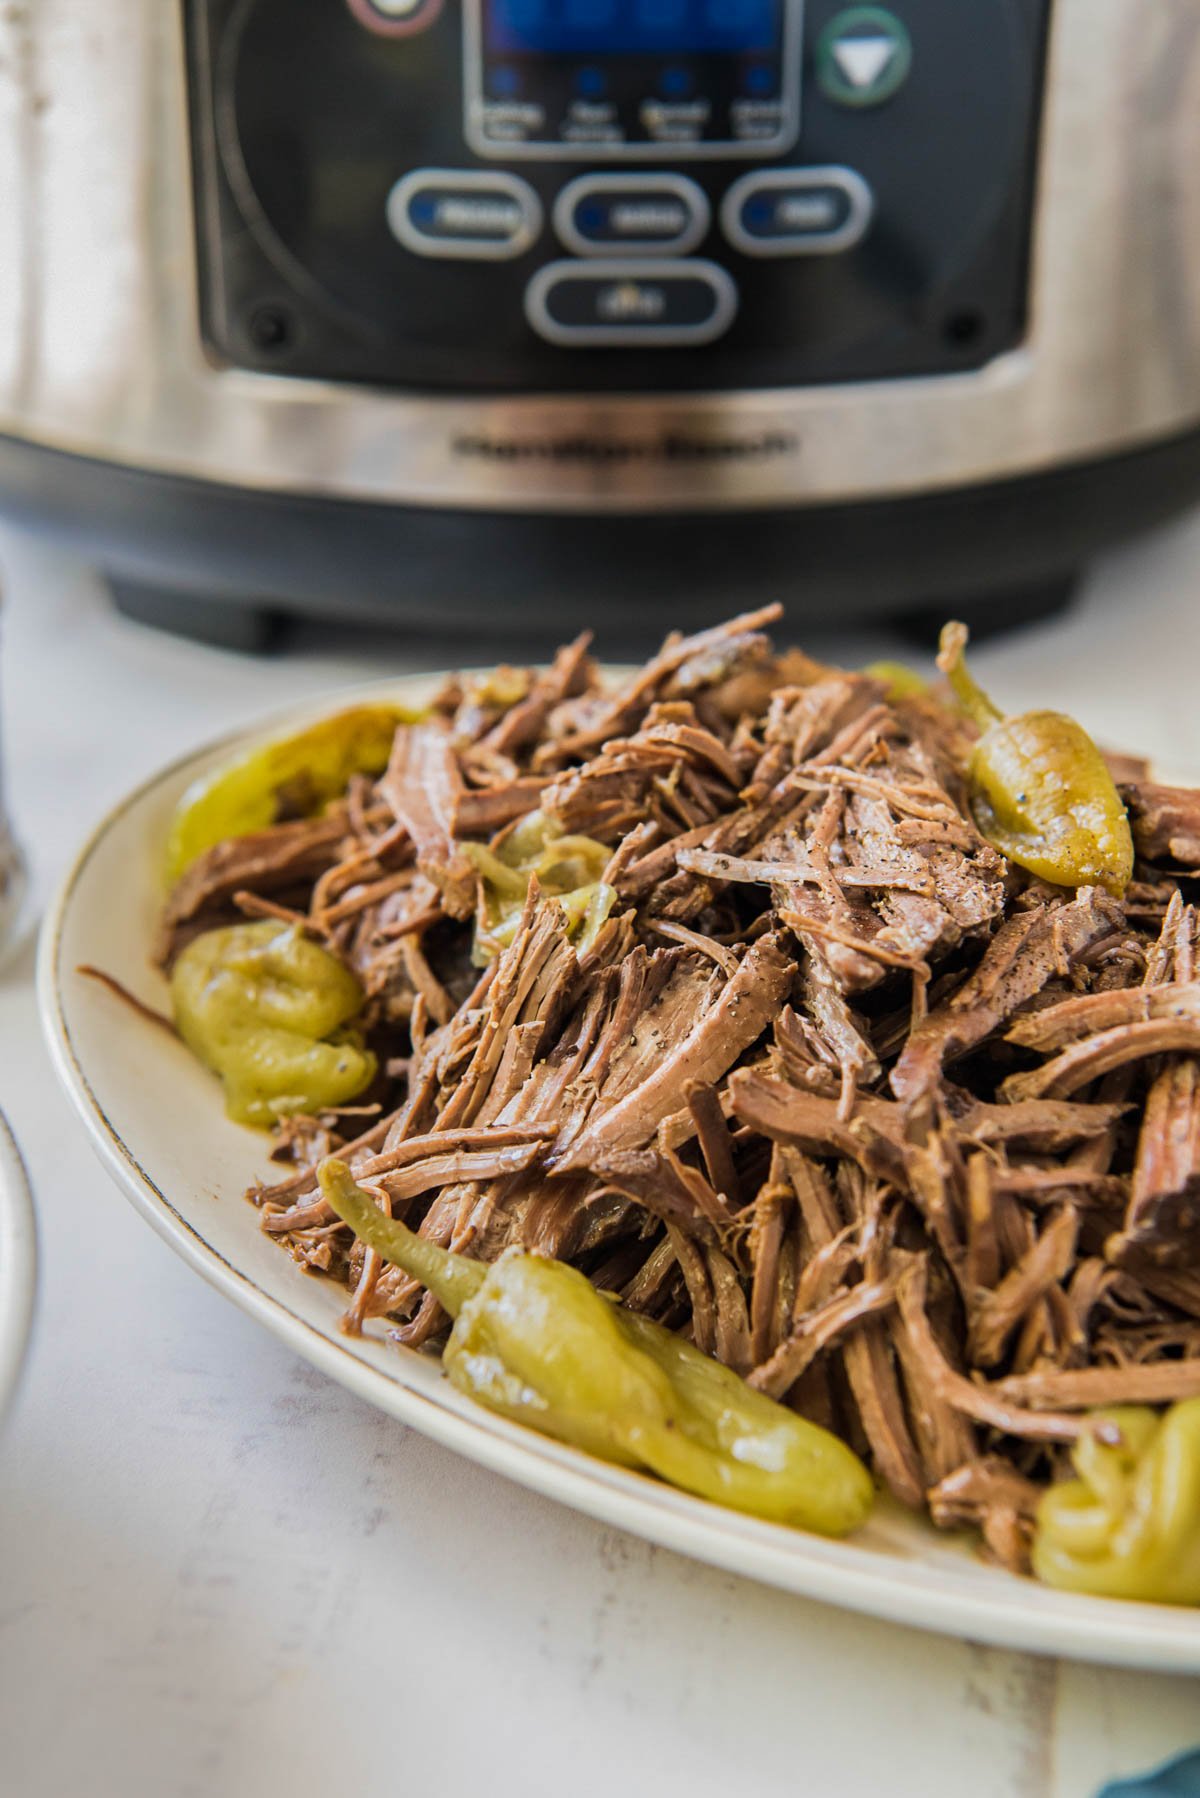 https://www.yellowblissroad.com/wp-content/uploads/2020/08/Slow-Cooker-Spicy-Top-Round-Roast-3.jpg